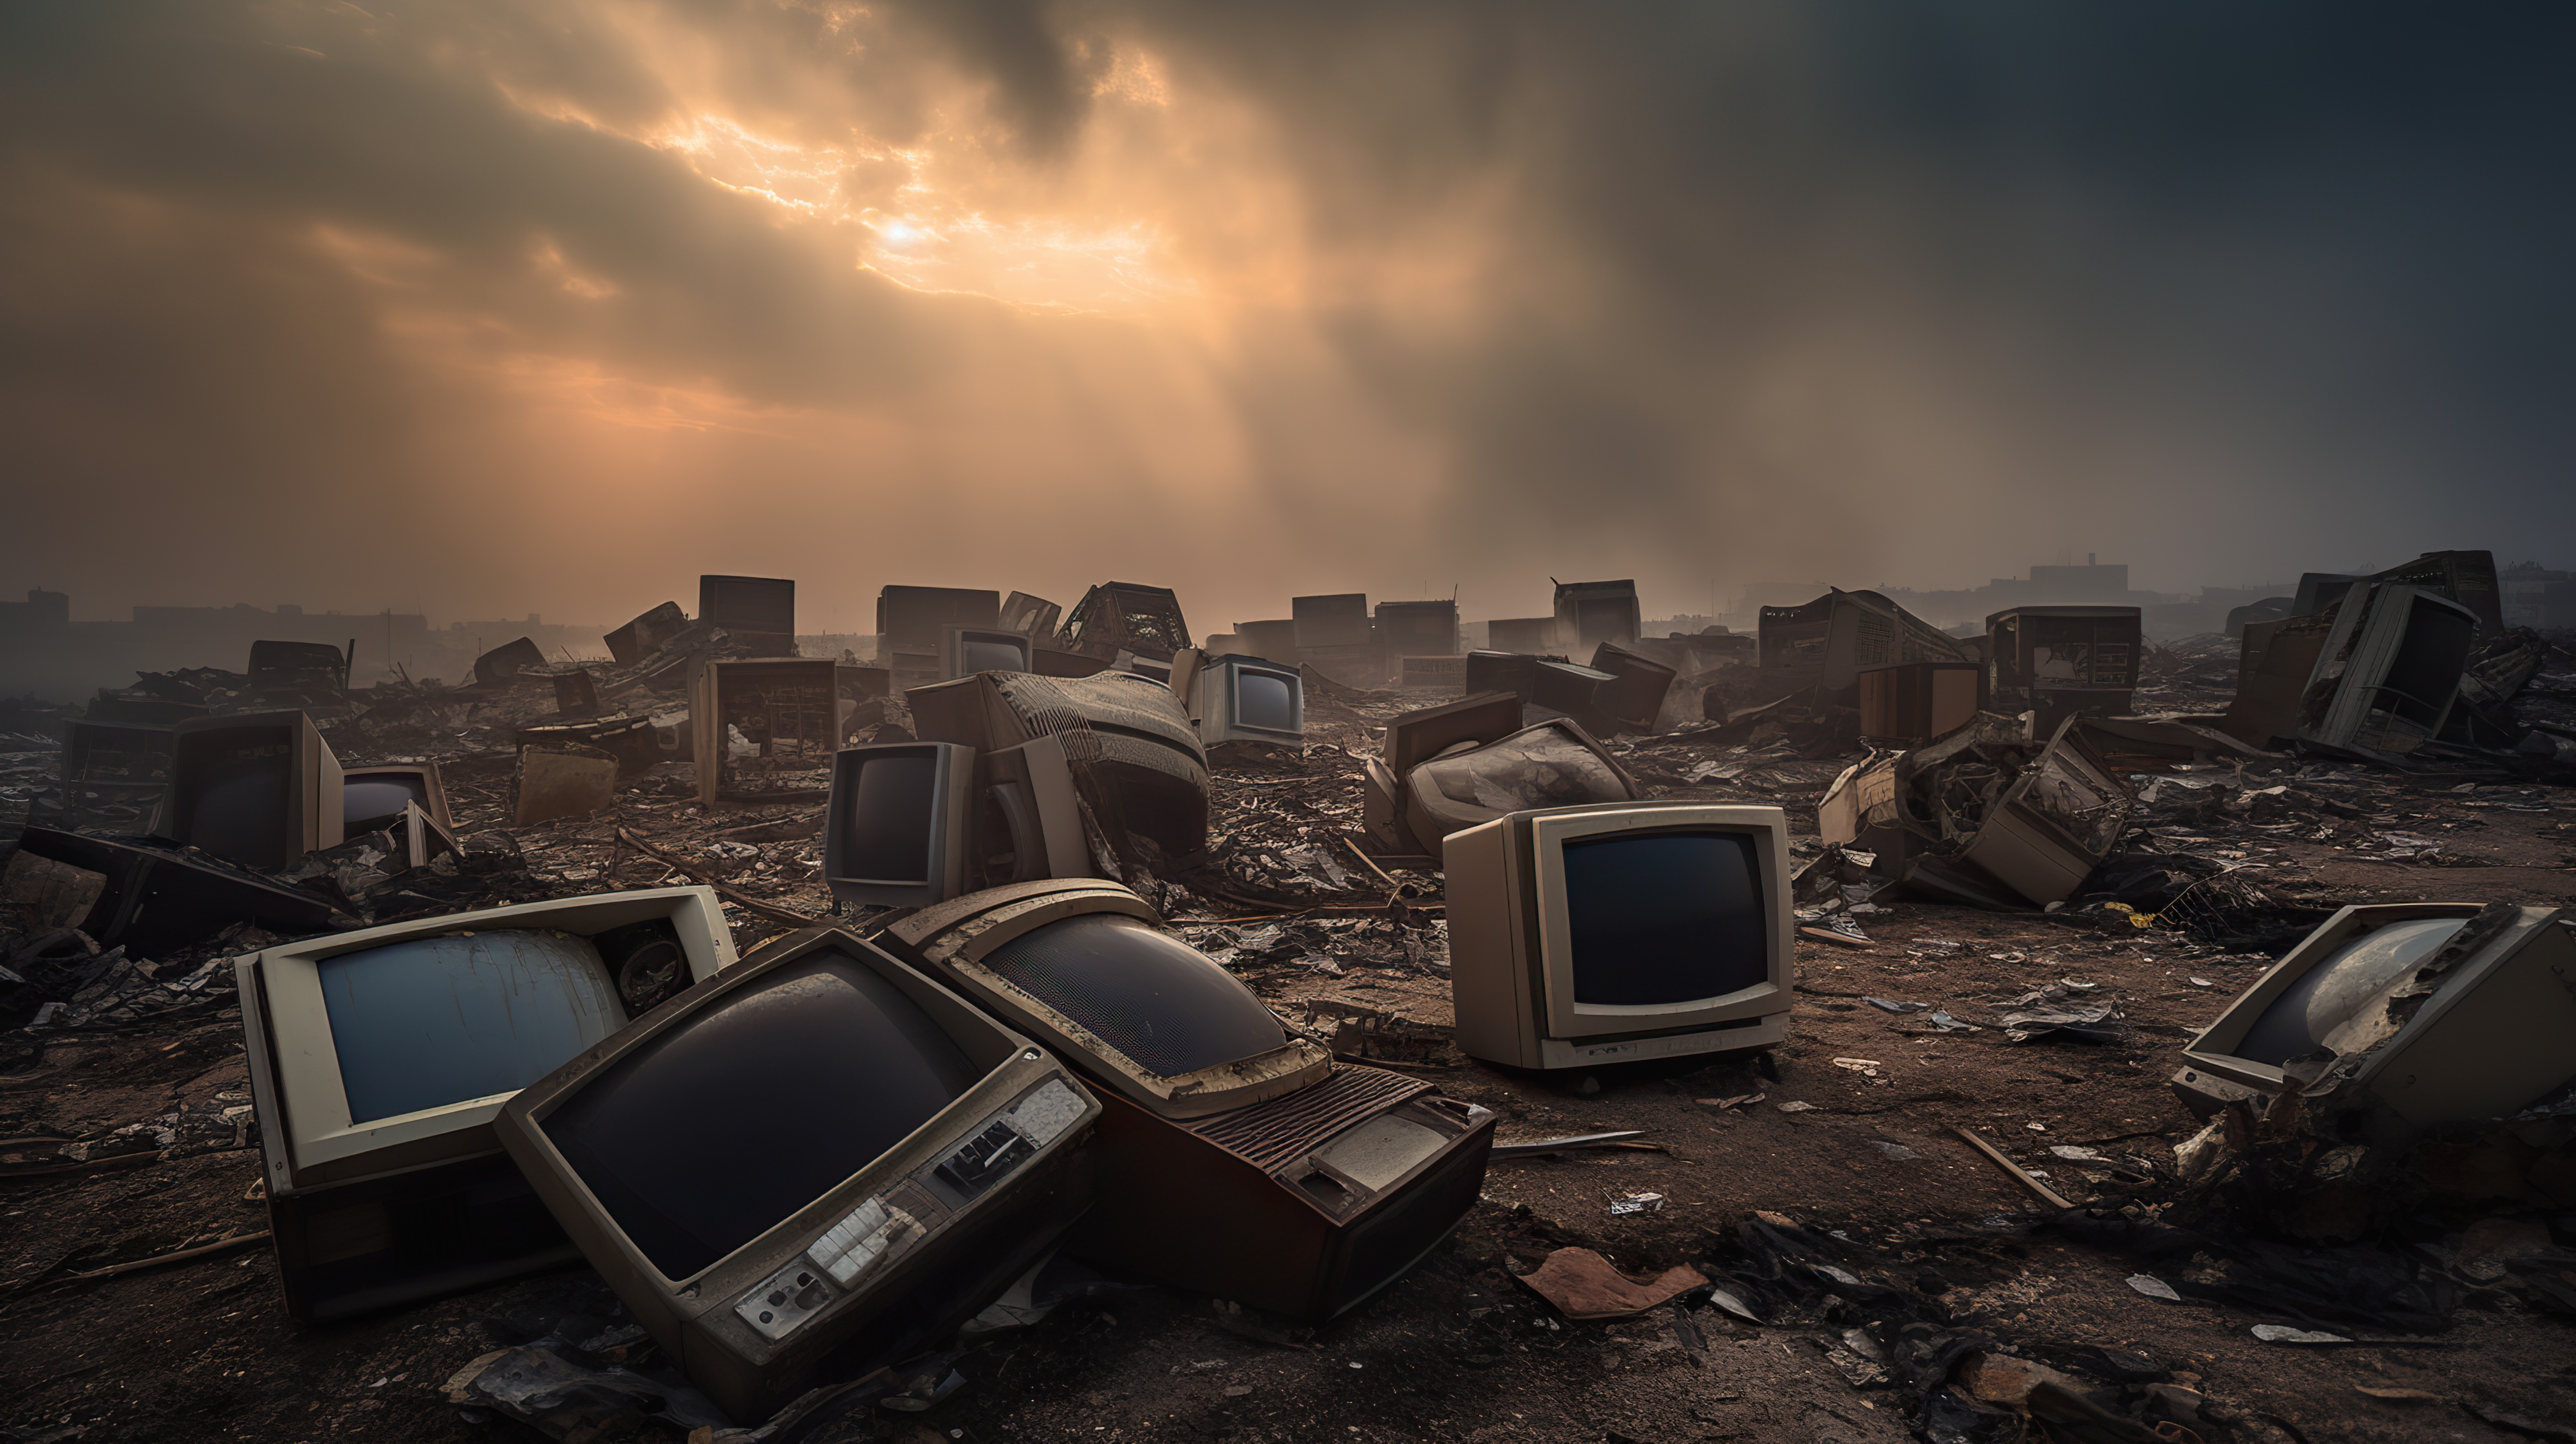 Landfill with old, rusted and broken televisions and apocalyptic background